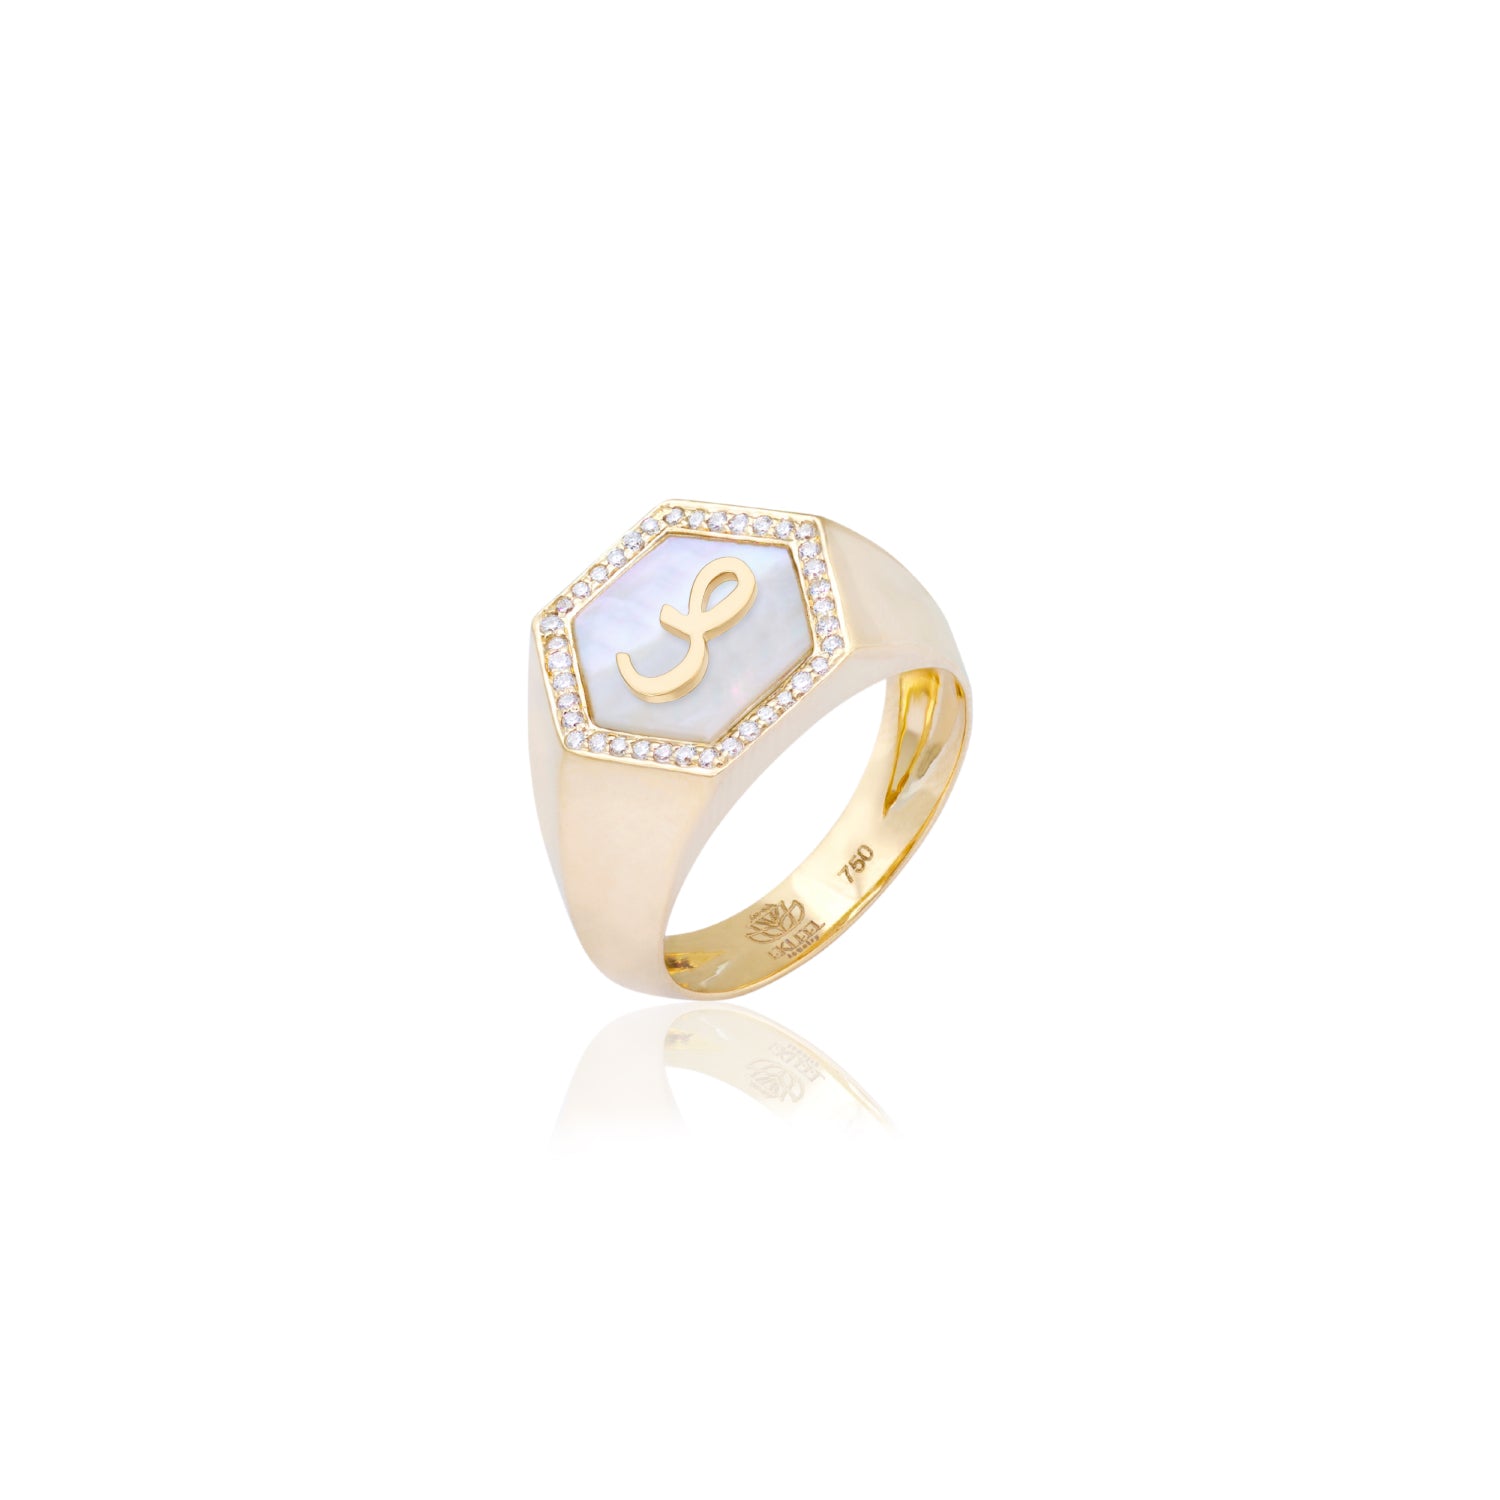 Qamoos 2.0 Letter ص White Mother of Pearl and Diamond Signet Ring in Yellow Gold